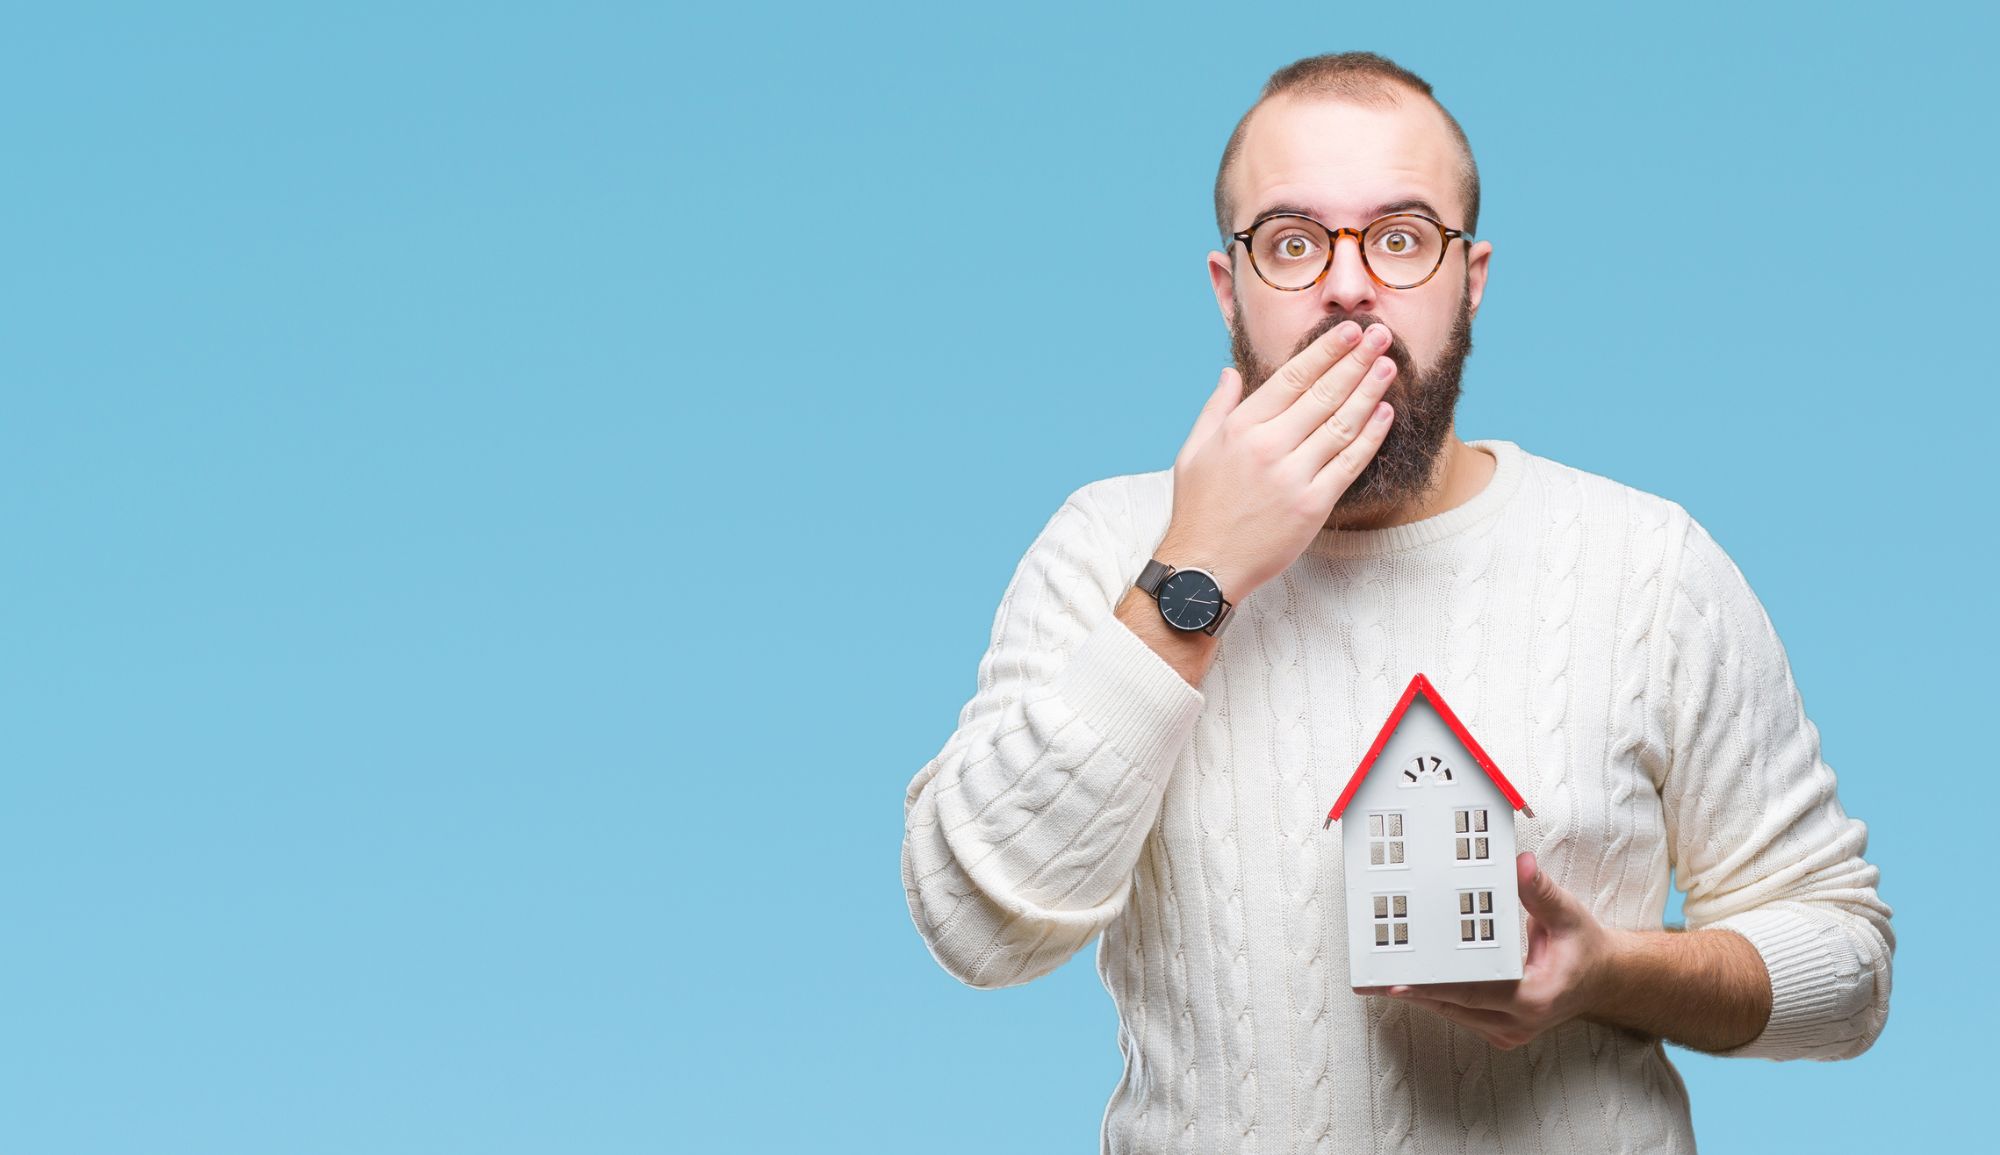 5 Marketing mistakes to avoid when selling your home